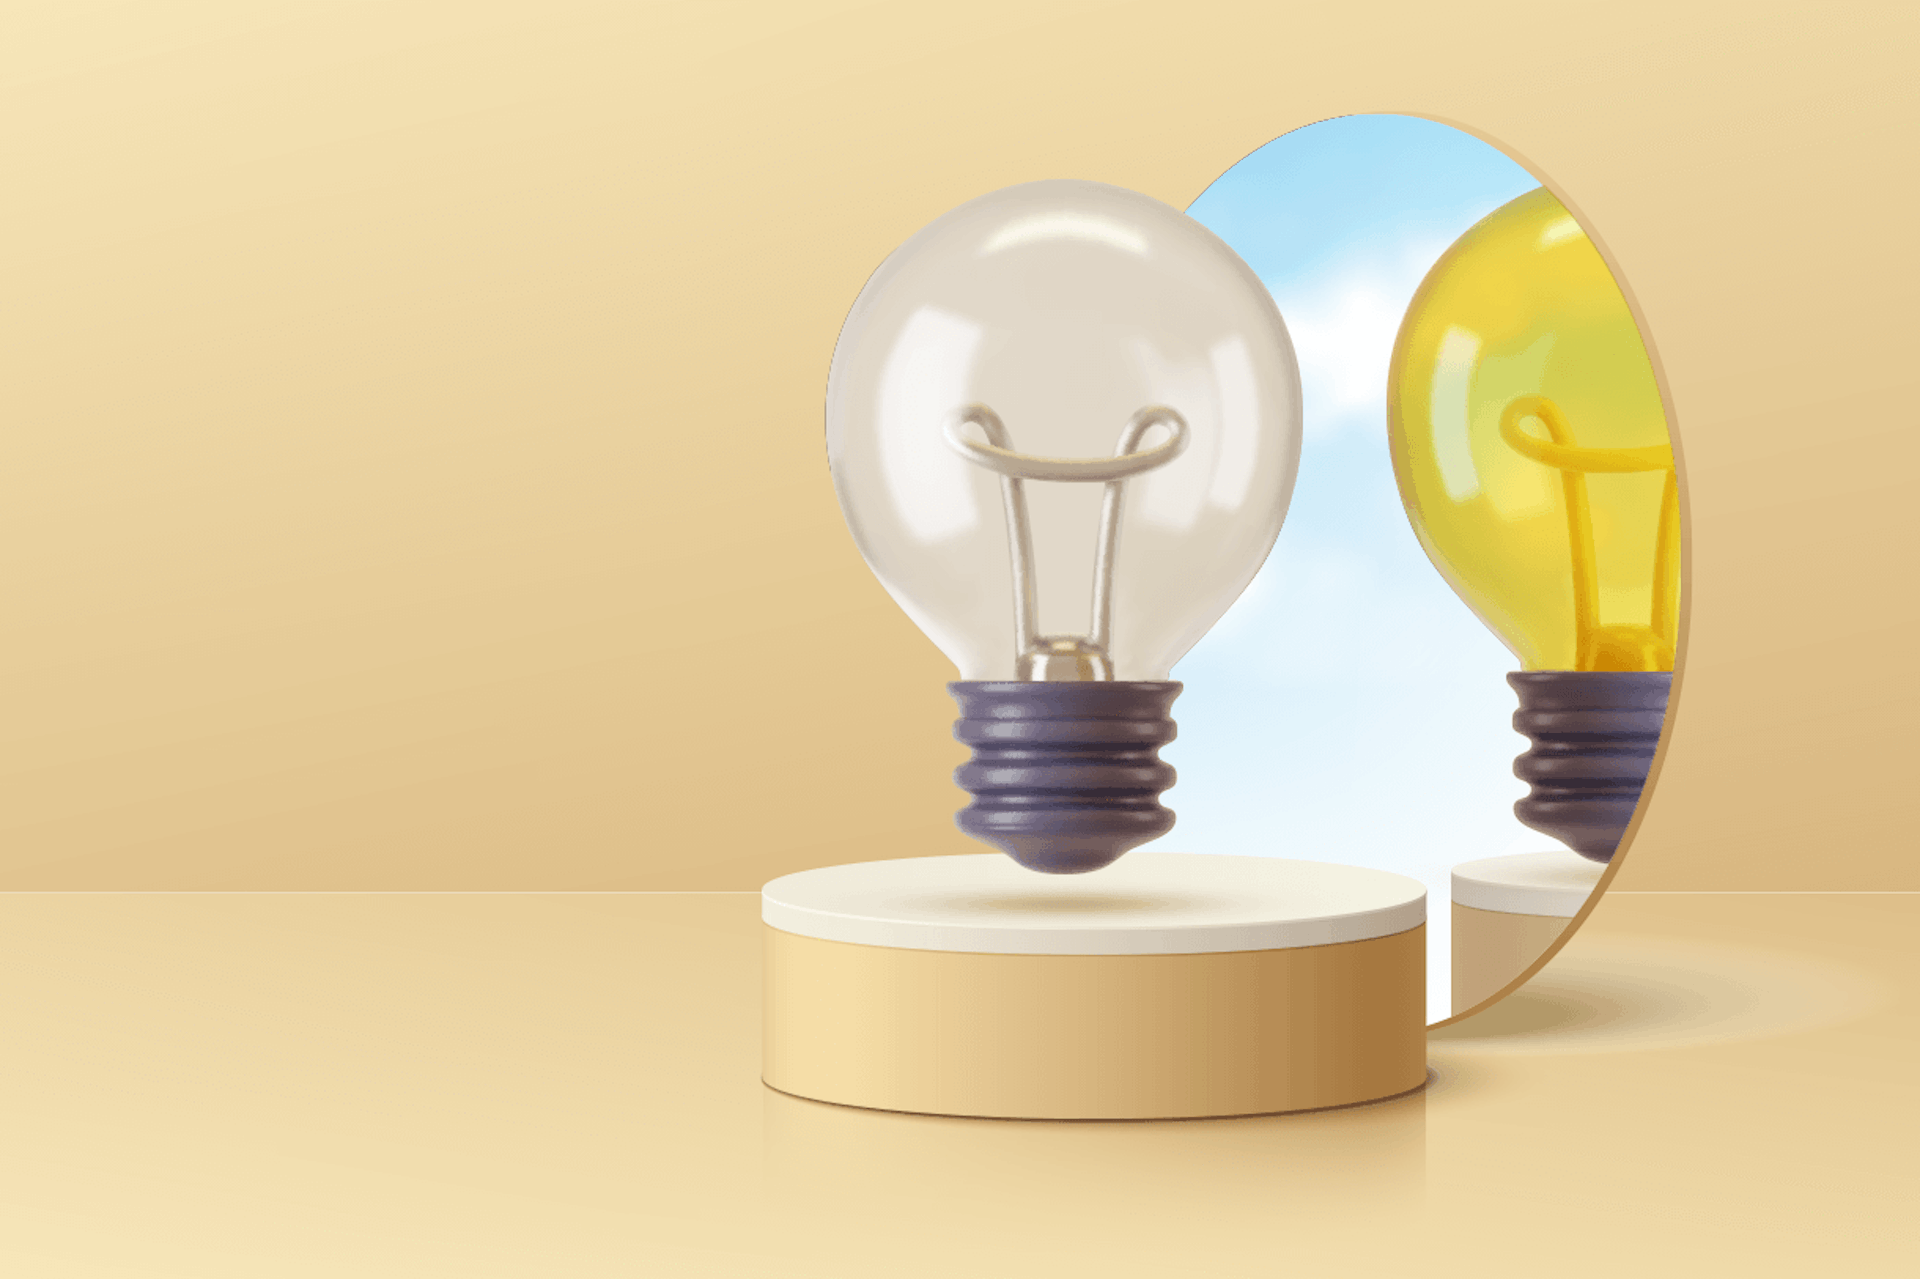 An illustration of a lightbulb looking into a mirror, meant to represent brand recognition.